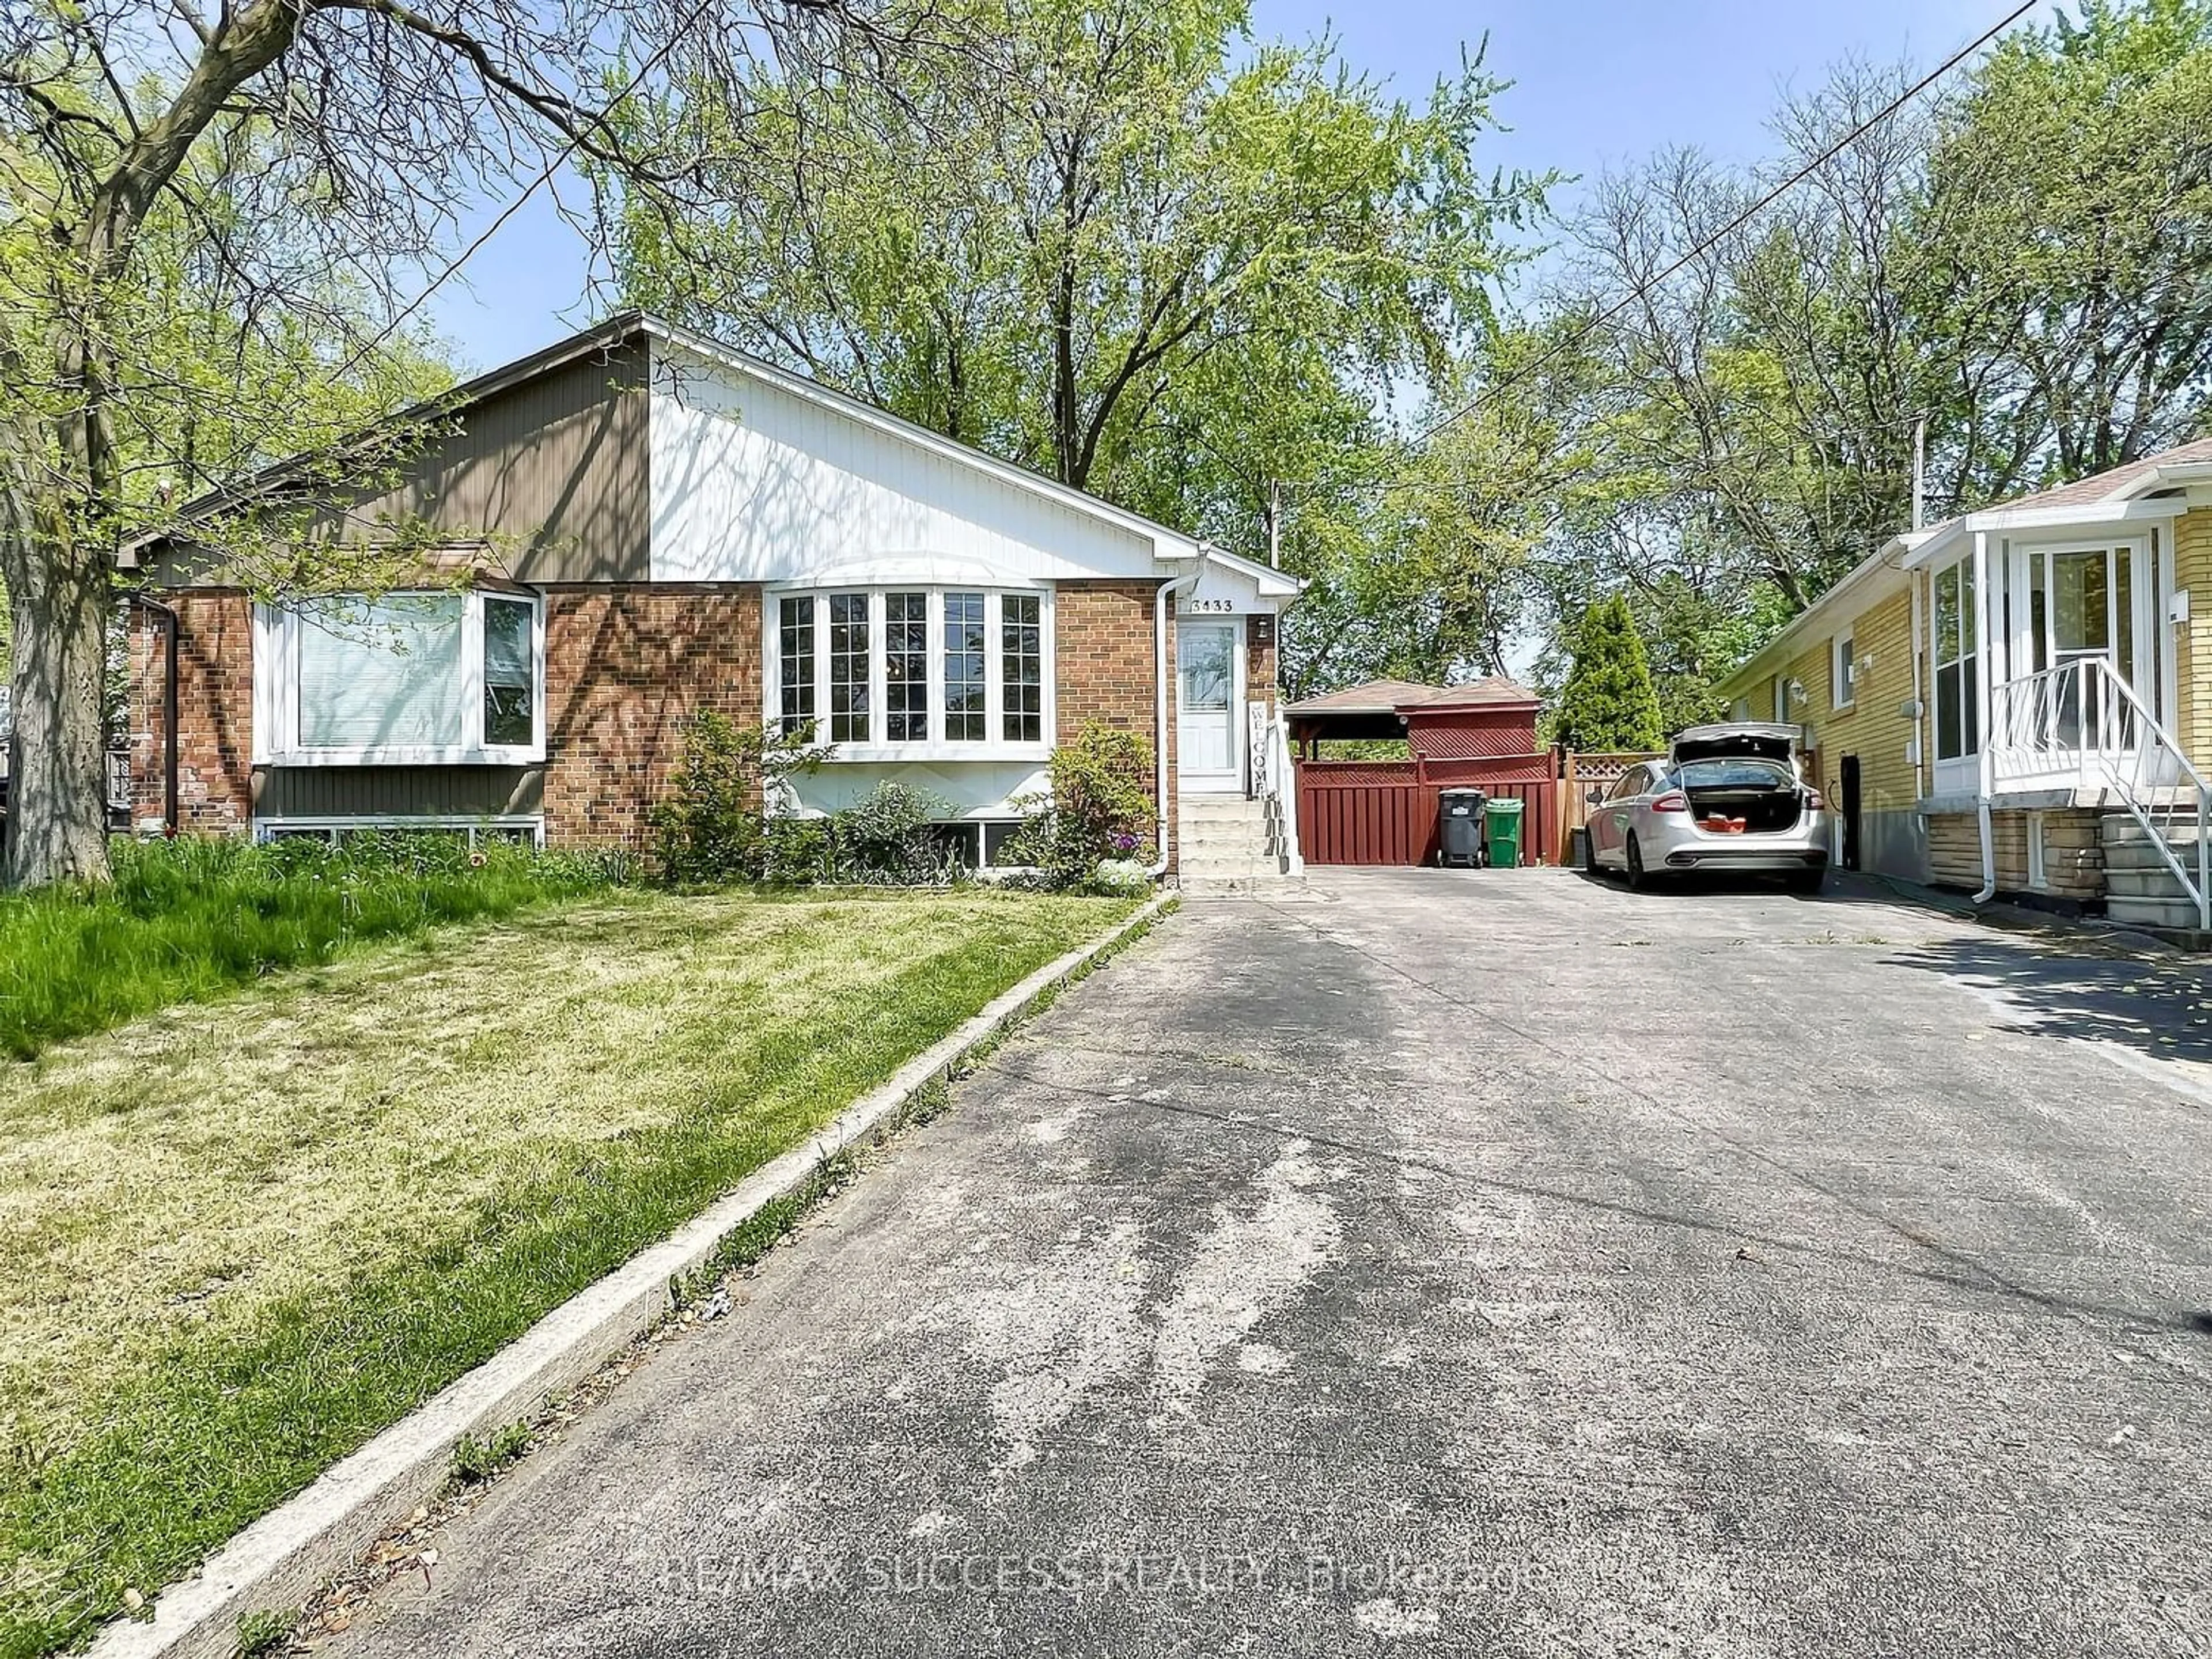 Street view for 3433 Fellmore Dr, Mississauga Ontario L5C 2E1